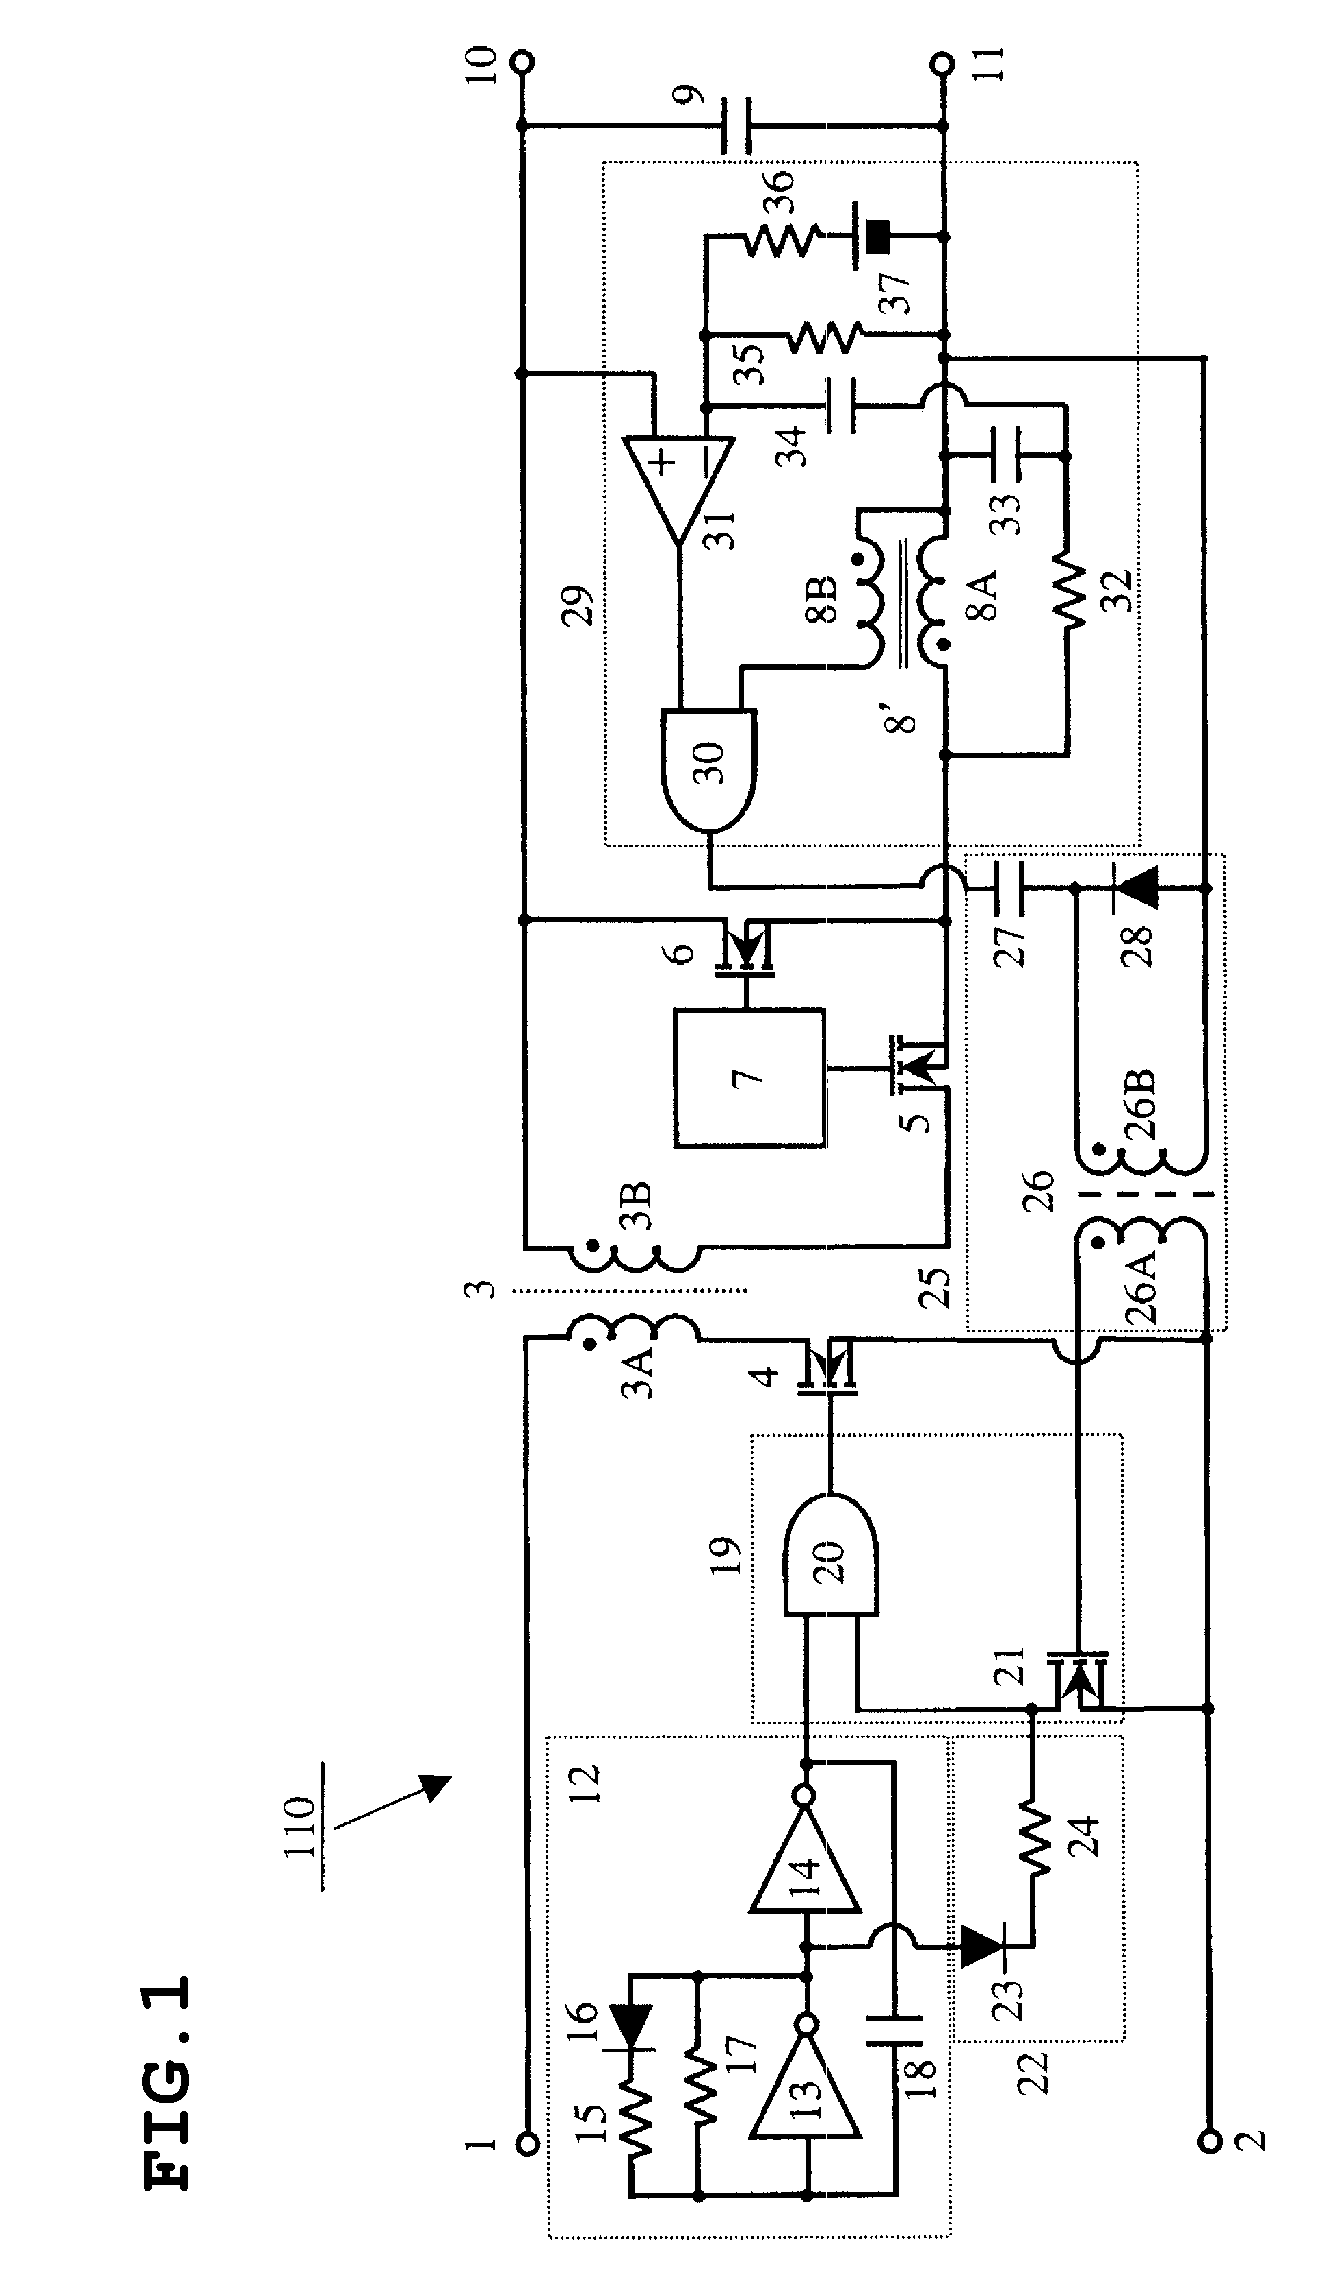 Insulated switching power source device